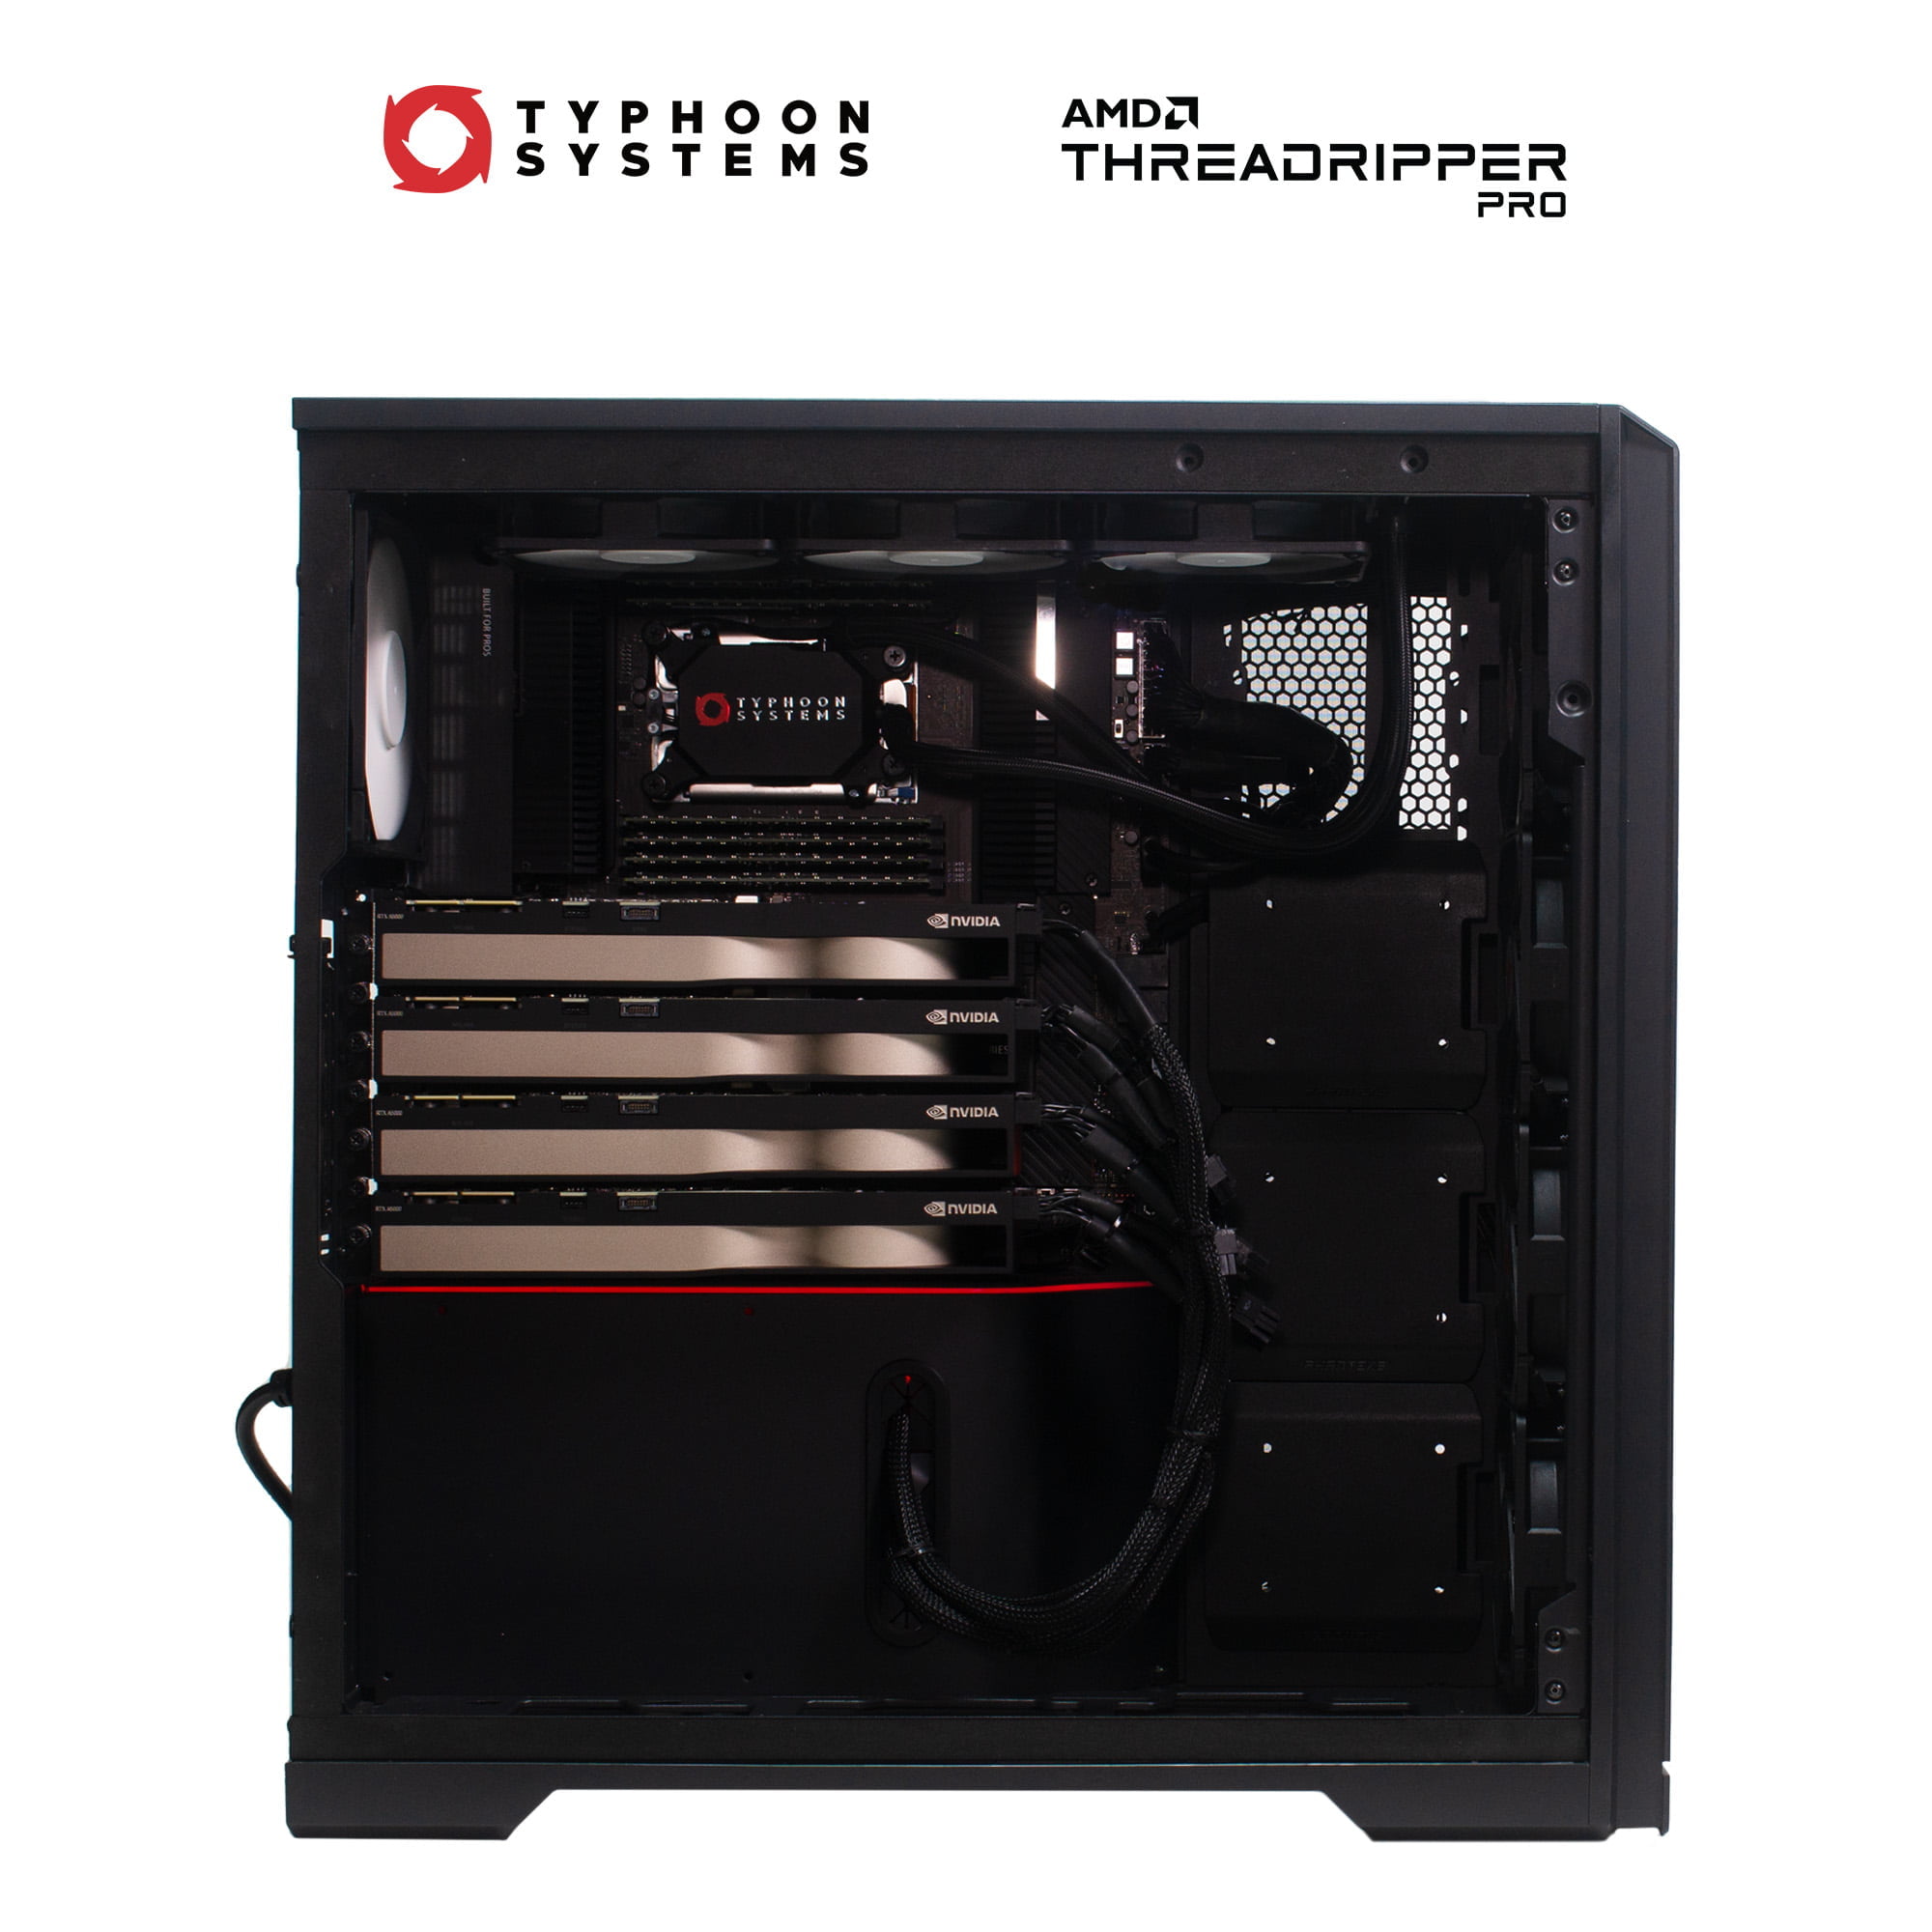 S-Ripper Pro Powered By AMD Cooled by Asetek